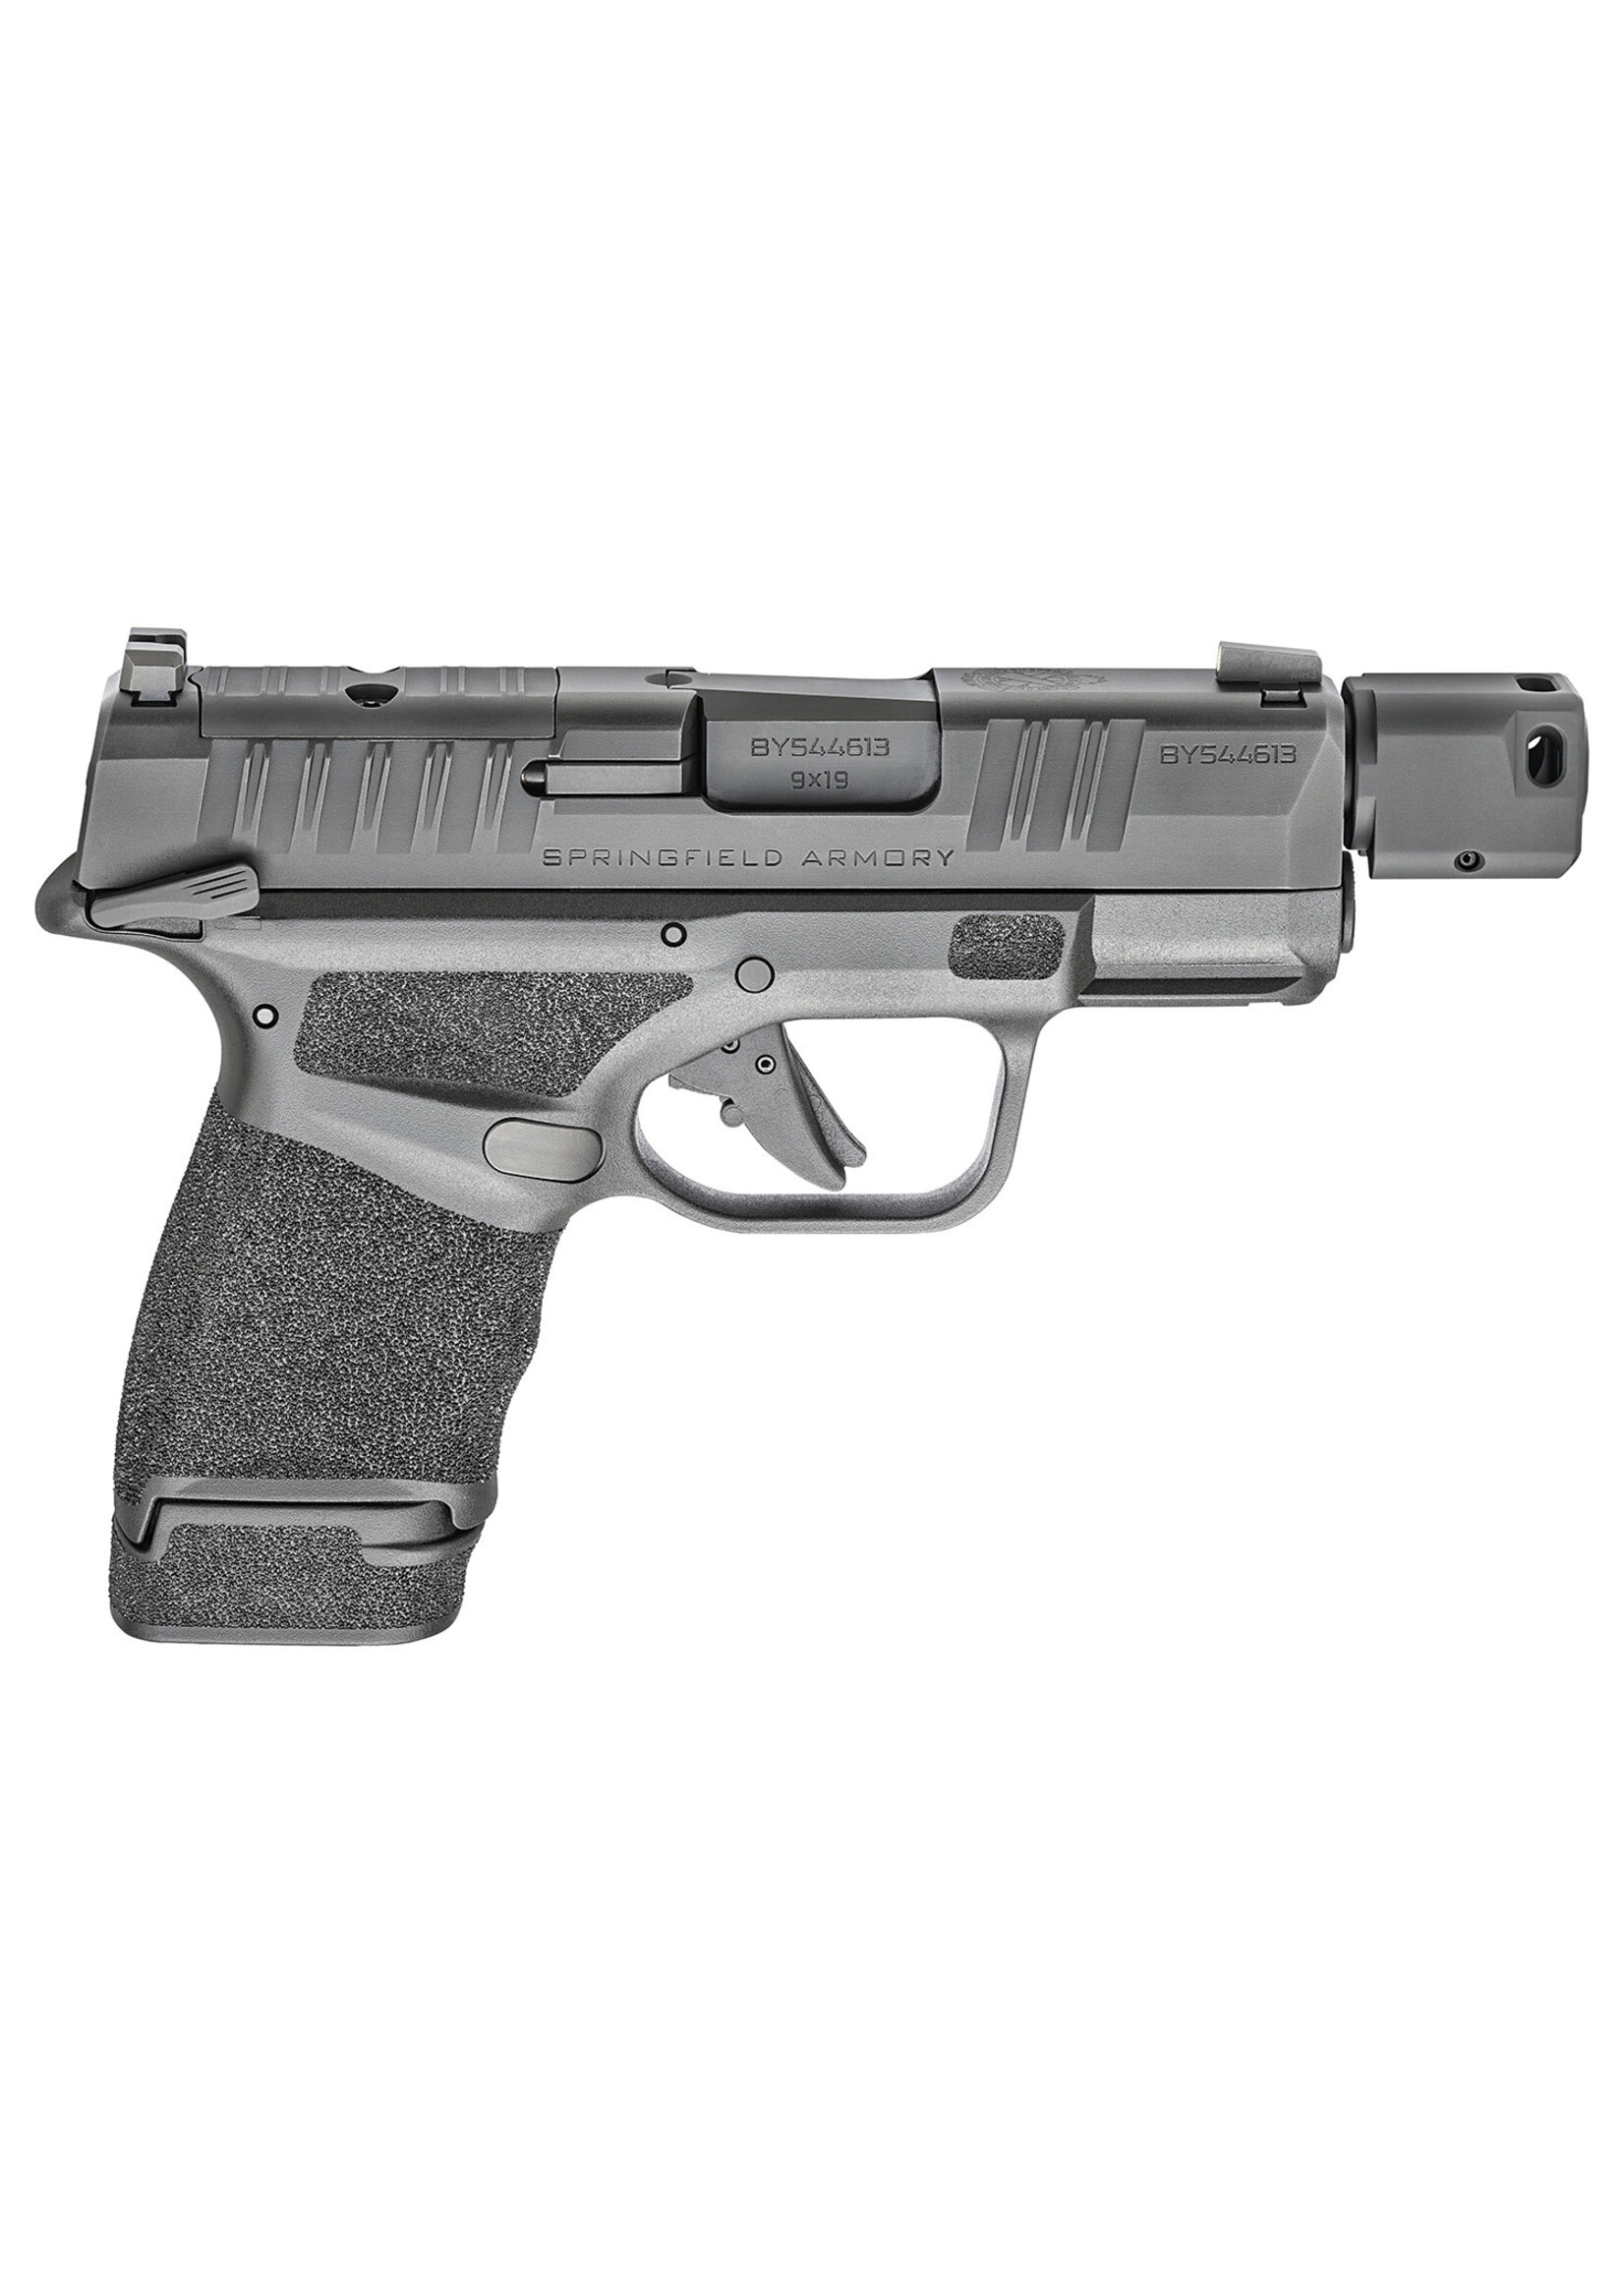 Springfield Armory Springfield Armory HC9389BTOSPMS Hellcat Micro-Compact RDP 9mm Luger 13+1/11+1 3.80" Threaded/Compensated Barrel, Black Polymer Frame w/Picatinny Acc. Rail & Adaptive Grip Texture, Optic Ready Slide, Ambidextrous Manual Thumb Safety